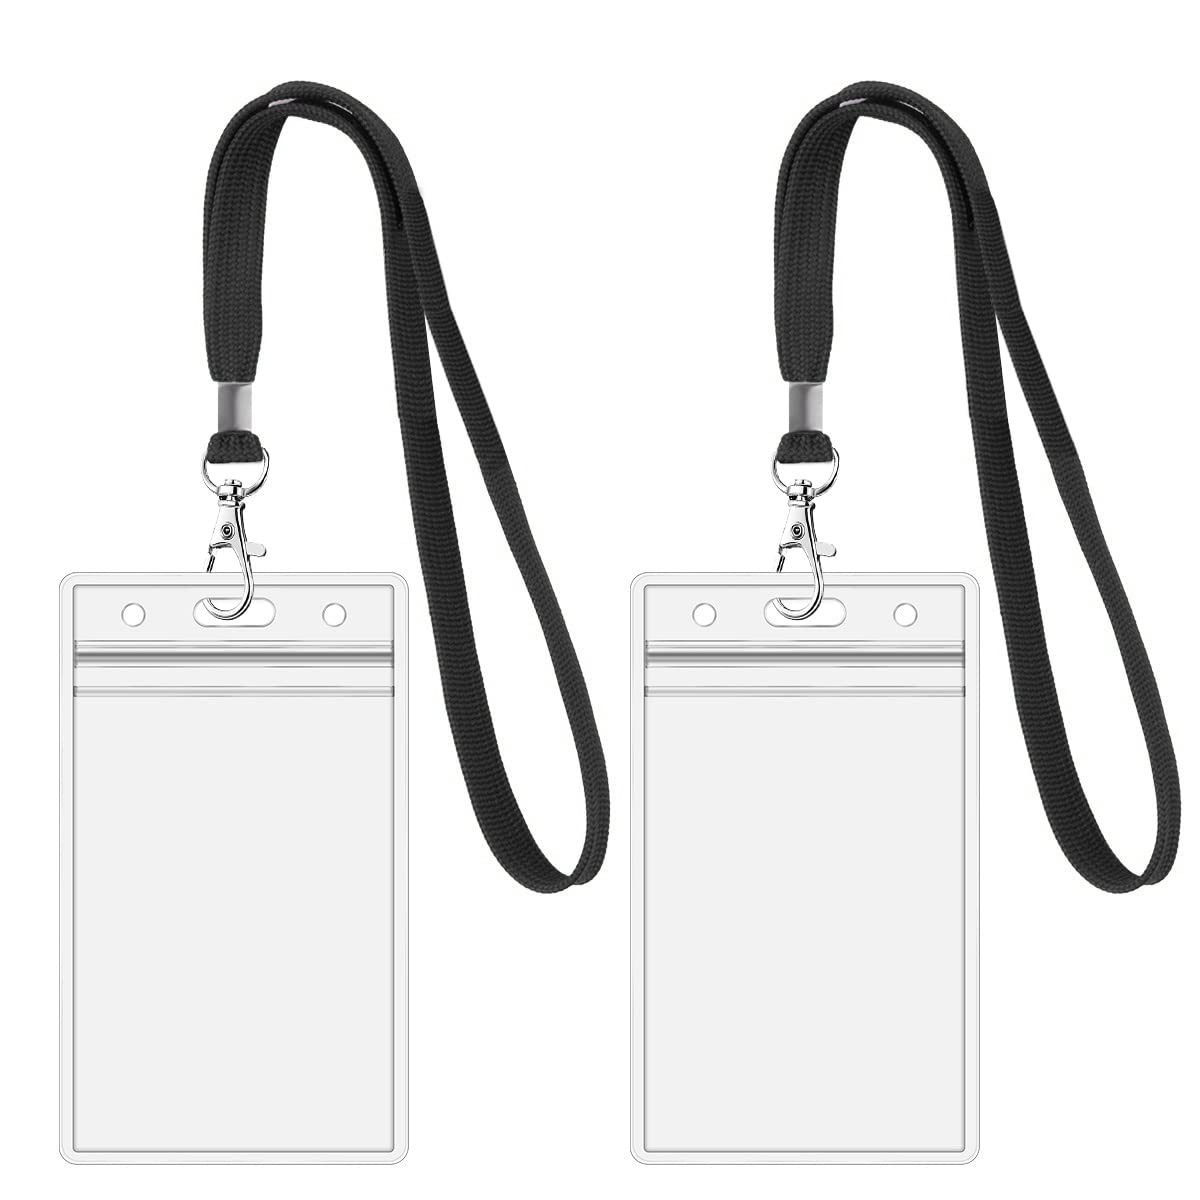 2Pack ID Badge Holder with Lanyards- Heavy Duty Clear ID Card Holder for Lanyard - Black Lanyards with Vertical ID Badge Holder for Offices, Staff, Students, Employees